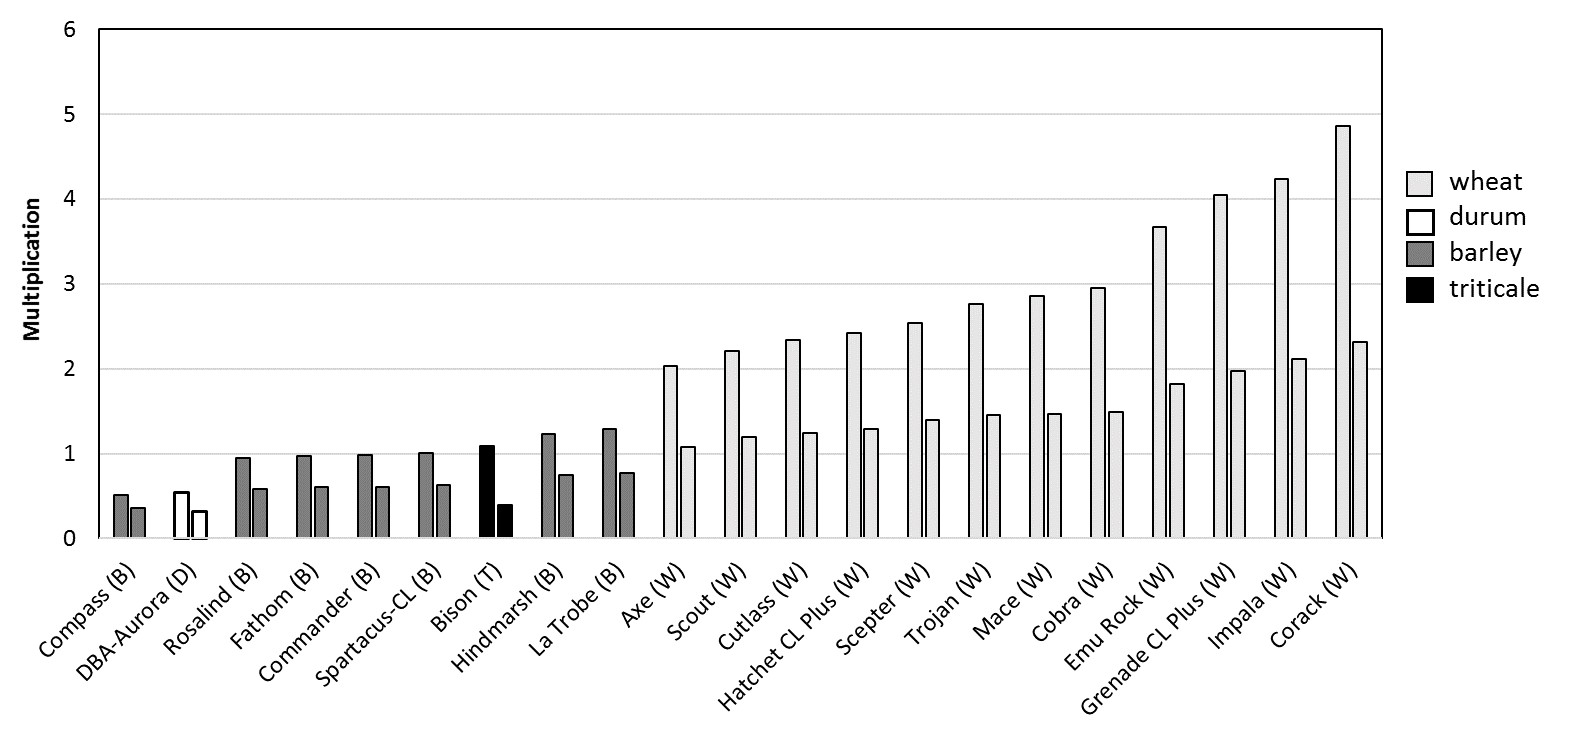 Figure 10. Predicted multiplication of Pratylenchus thornei on cereal varieties at low and medium initial population densities across four southern region trials 2011 to 2016. Initial population densities in the low (LHS column) and high nematode (RHS column) treatments were 5 and 15 nematodes/g soil respectively.